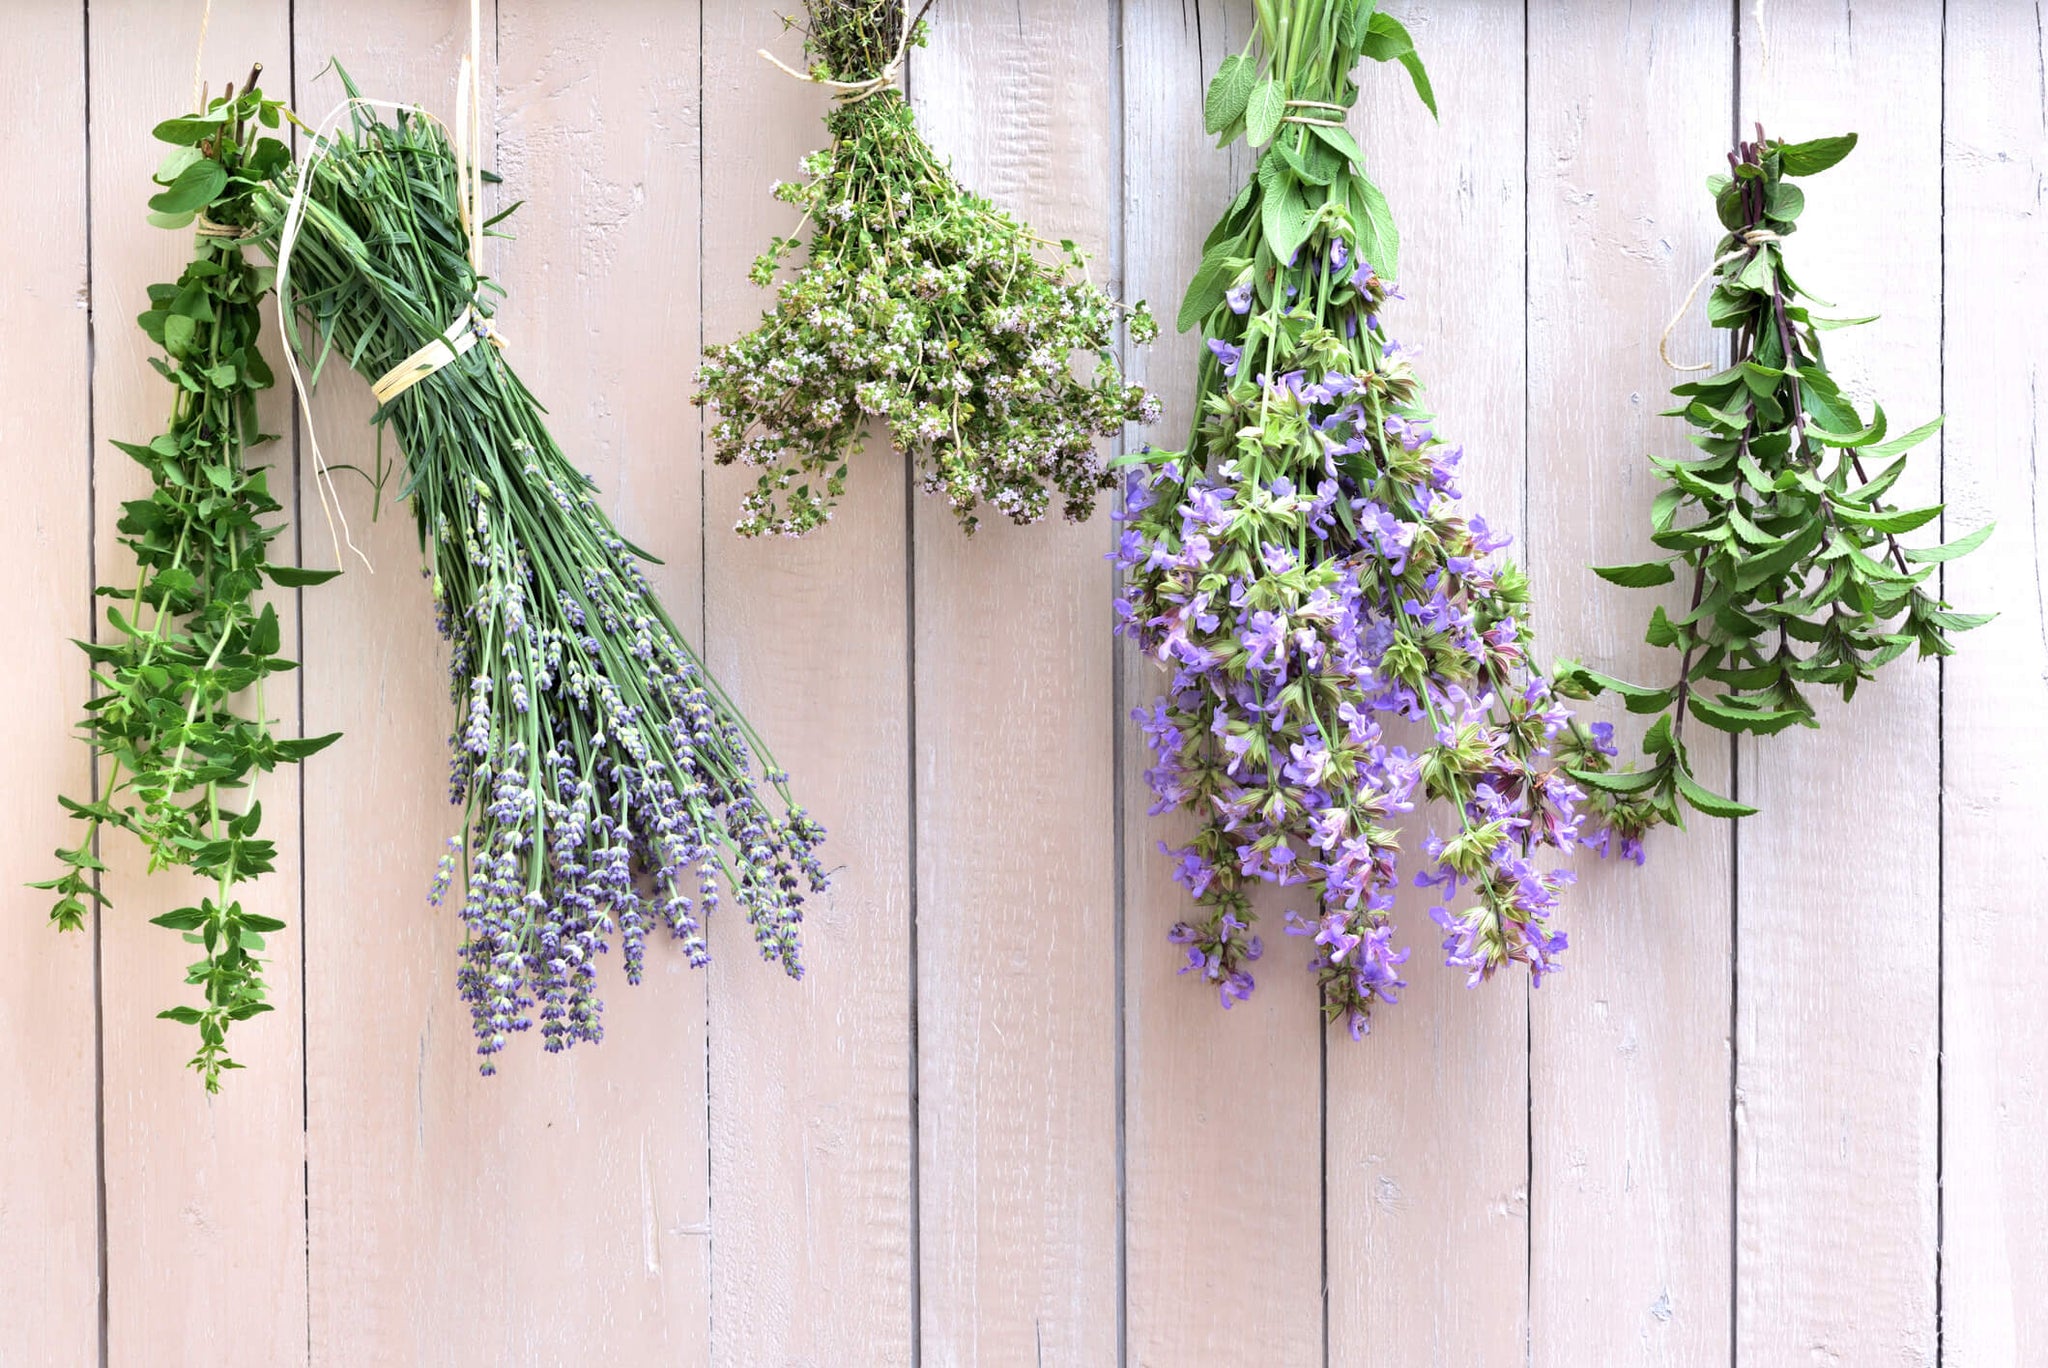 Bunches of fresh flowers hanging and drying on a wooden wall background.